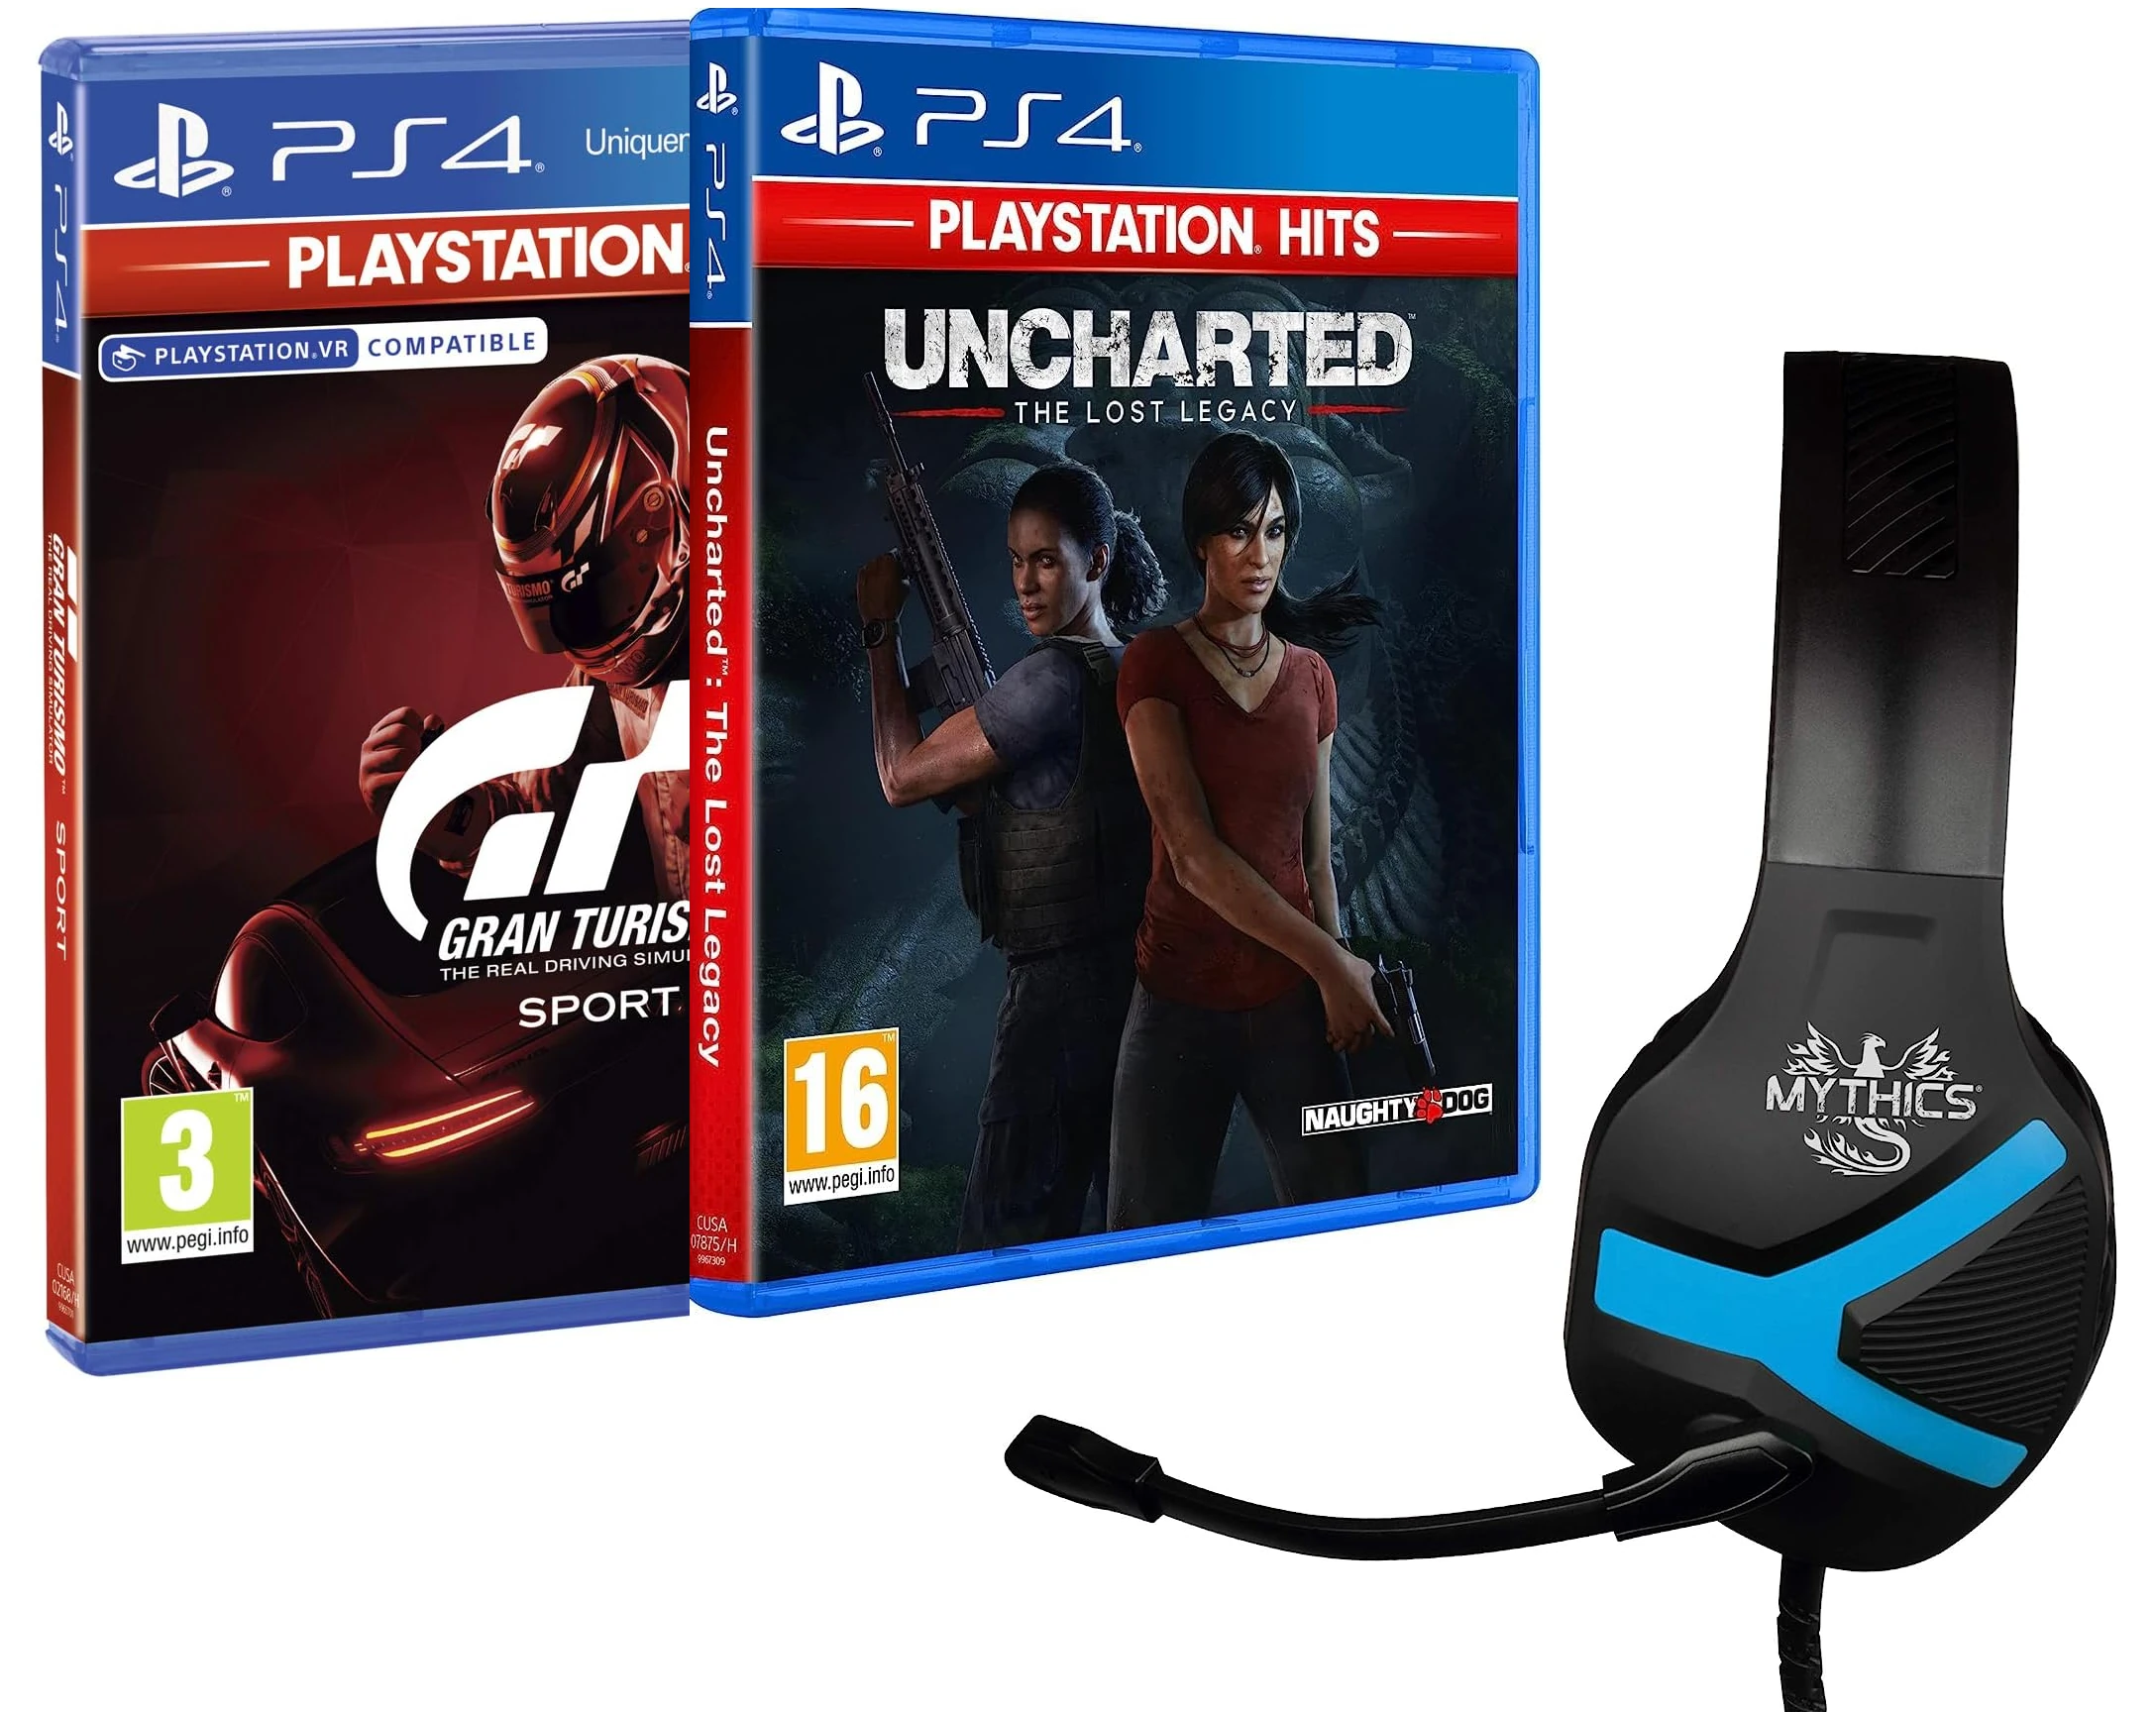 Casque Filaire Konix - Mythics Nemesis + Gran Turismo Sport +  Uncharted The Lost Legacy